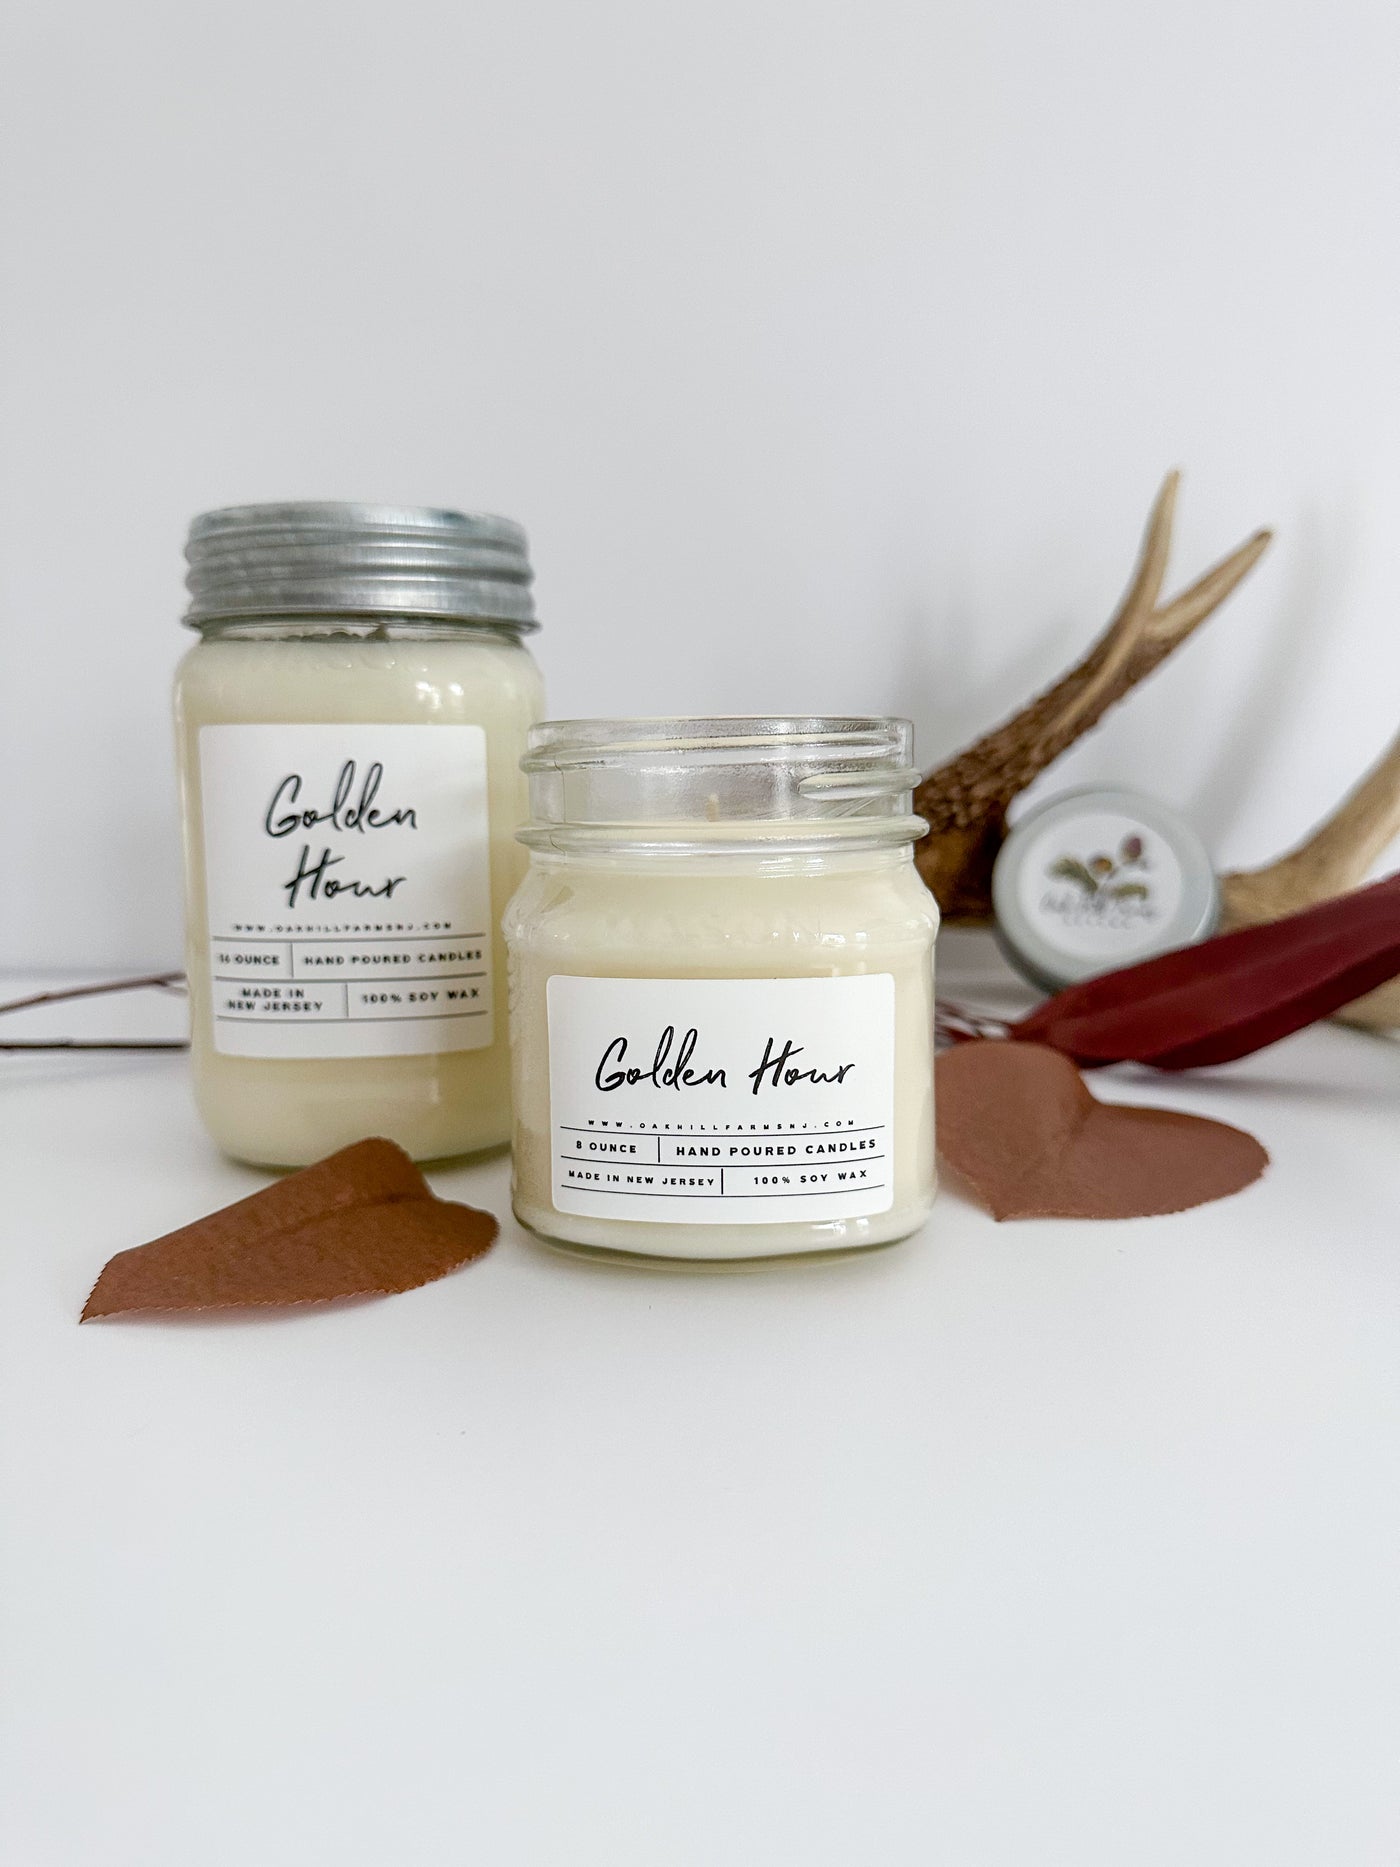 Golden Hour Soy Wax Candle